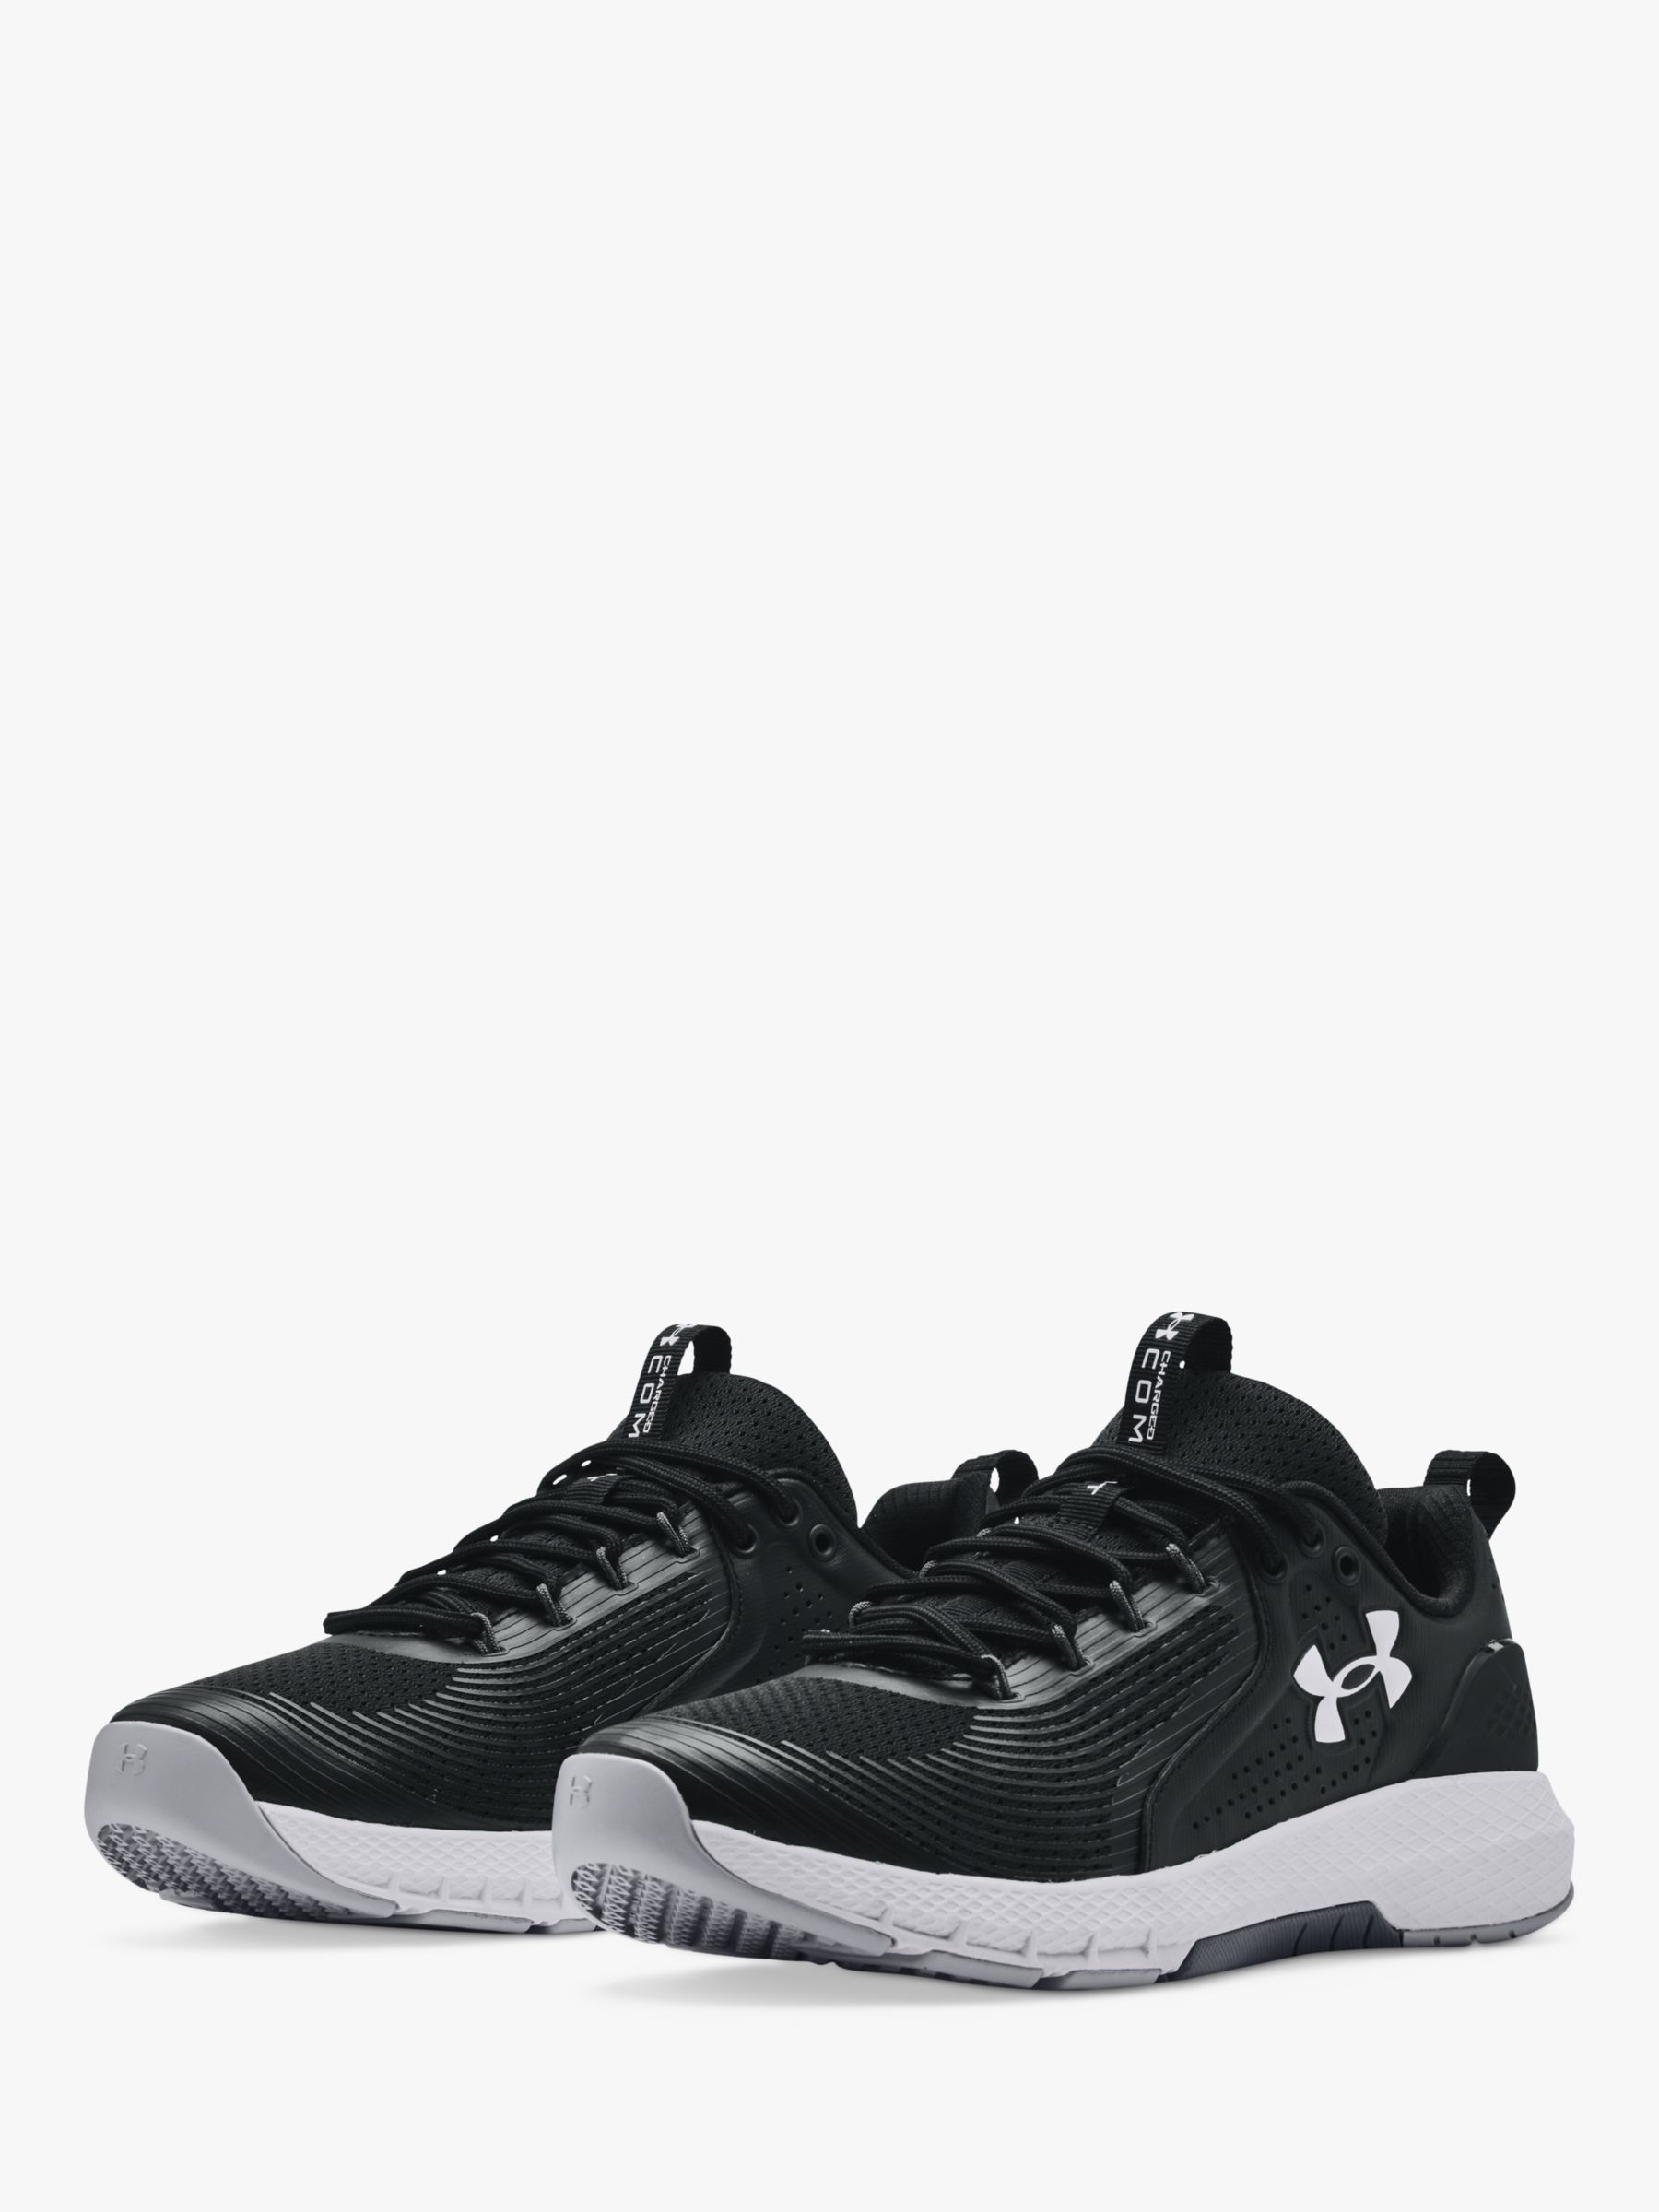 Under Armour Charged Commit TR 3 Men's Cross Trainers